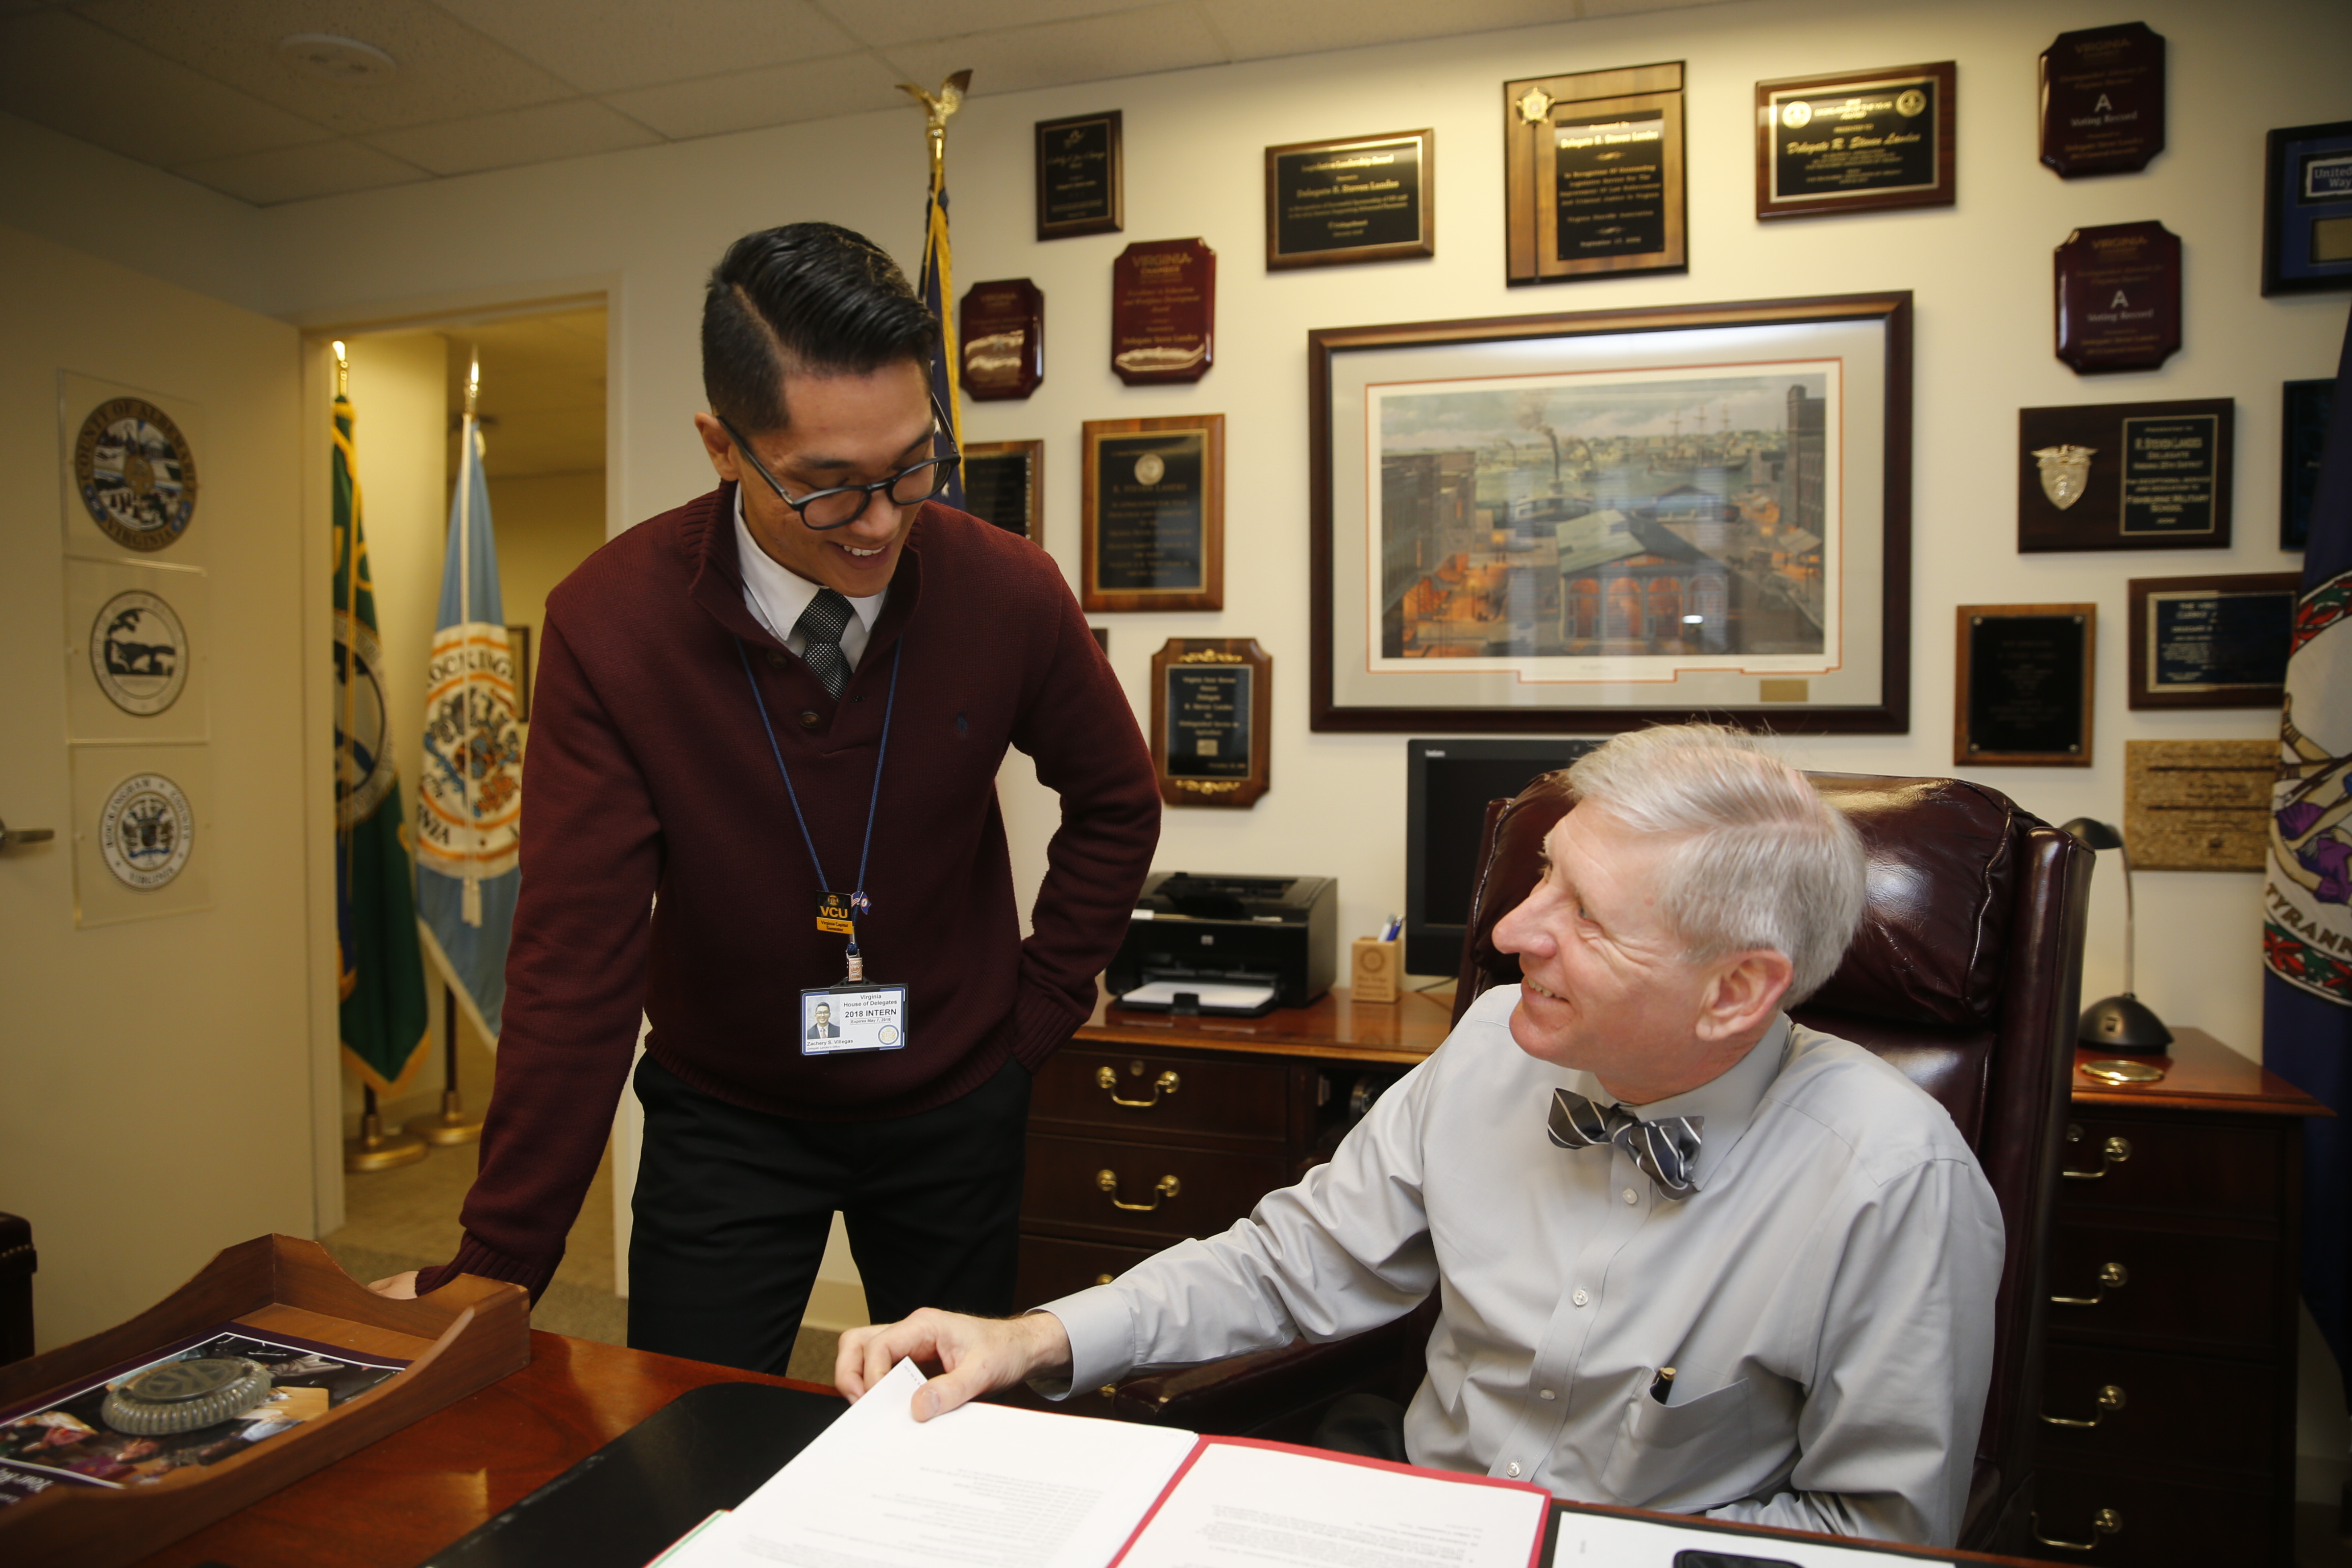 Zach Villegas meets with Del. R. Steven Landes at his office on February 19.